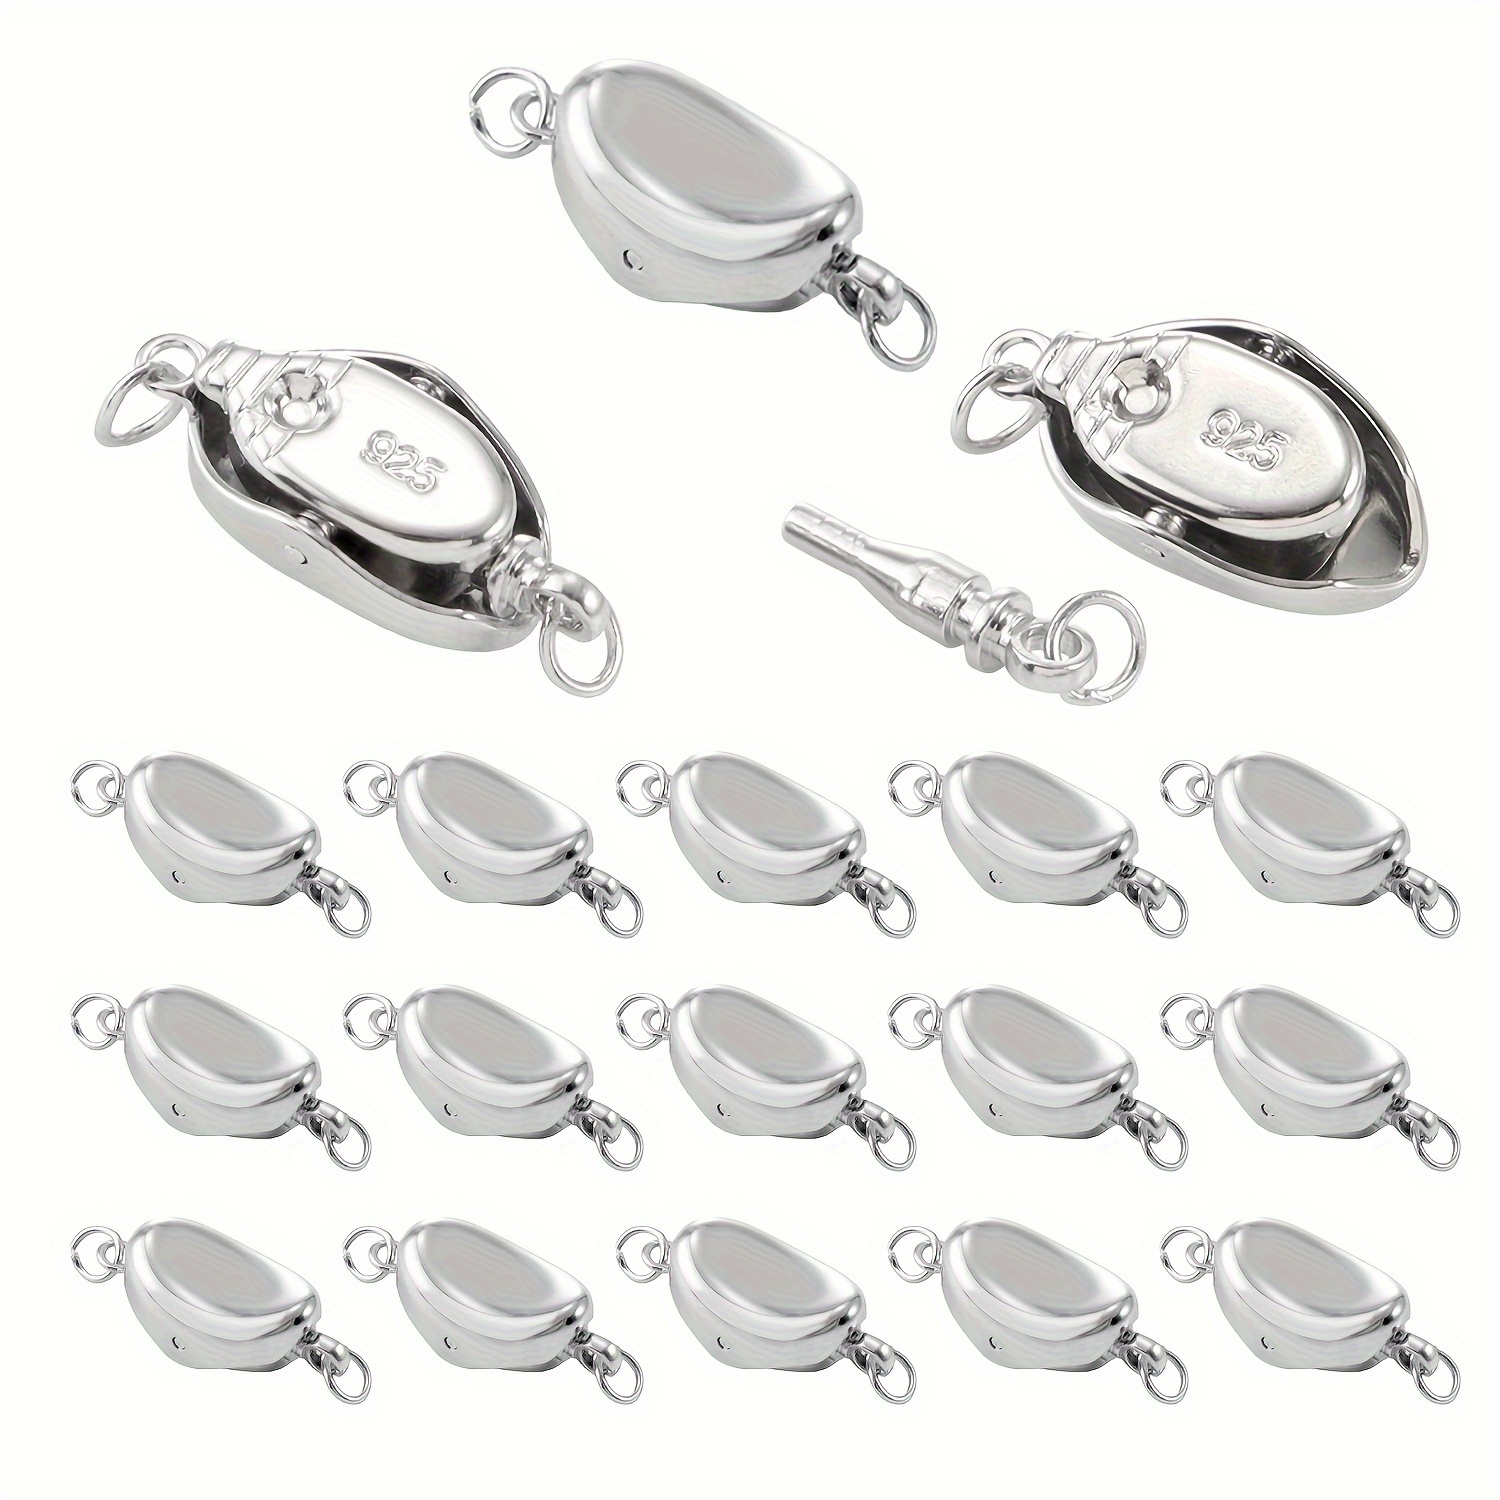 

5-pack 925 Sterling Silvery Pearl Clasps - Diy Jewelry Findings For Necklaces & Bracelets Crafting Charms For Jewelry Making Beads For Jewelry Making